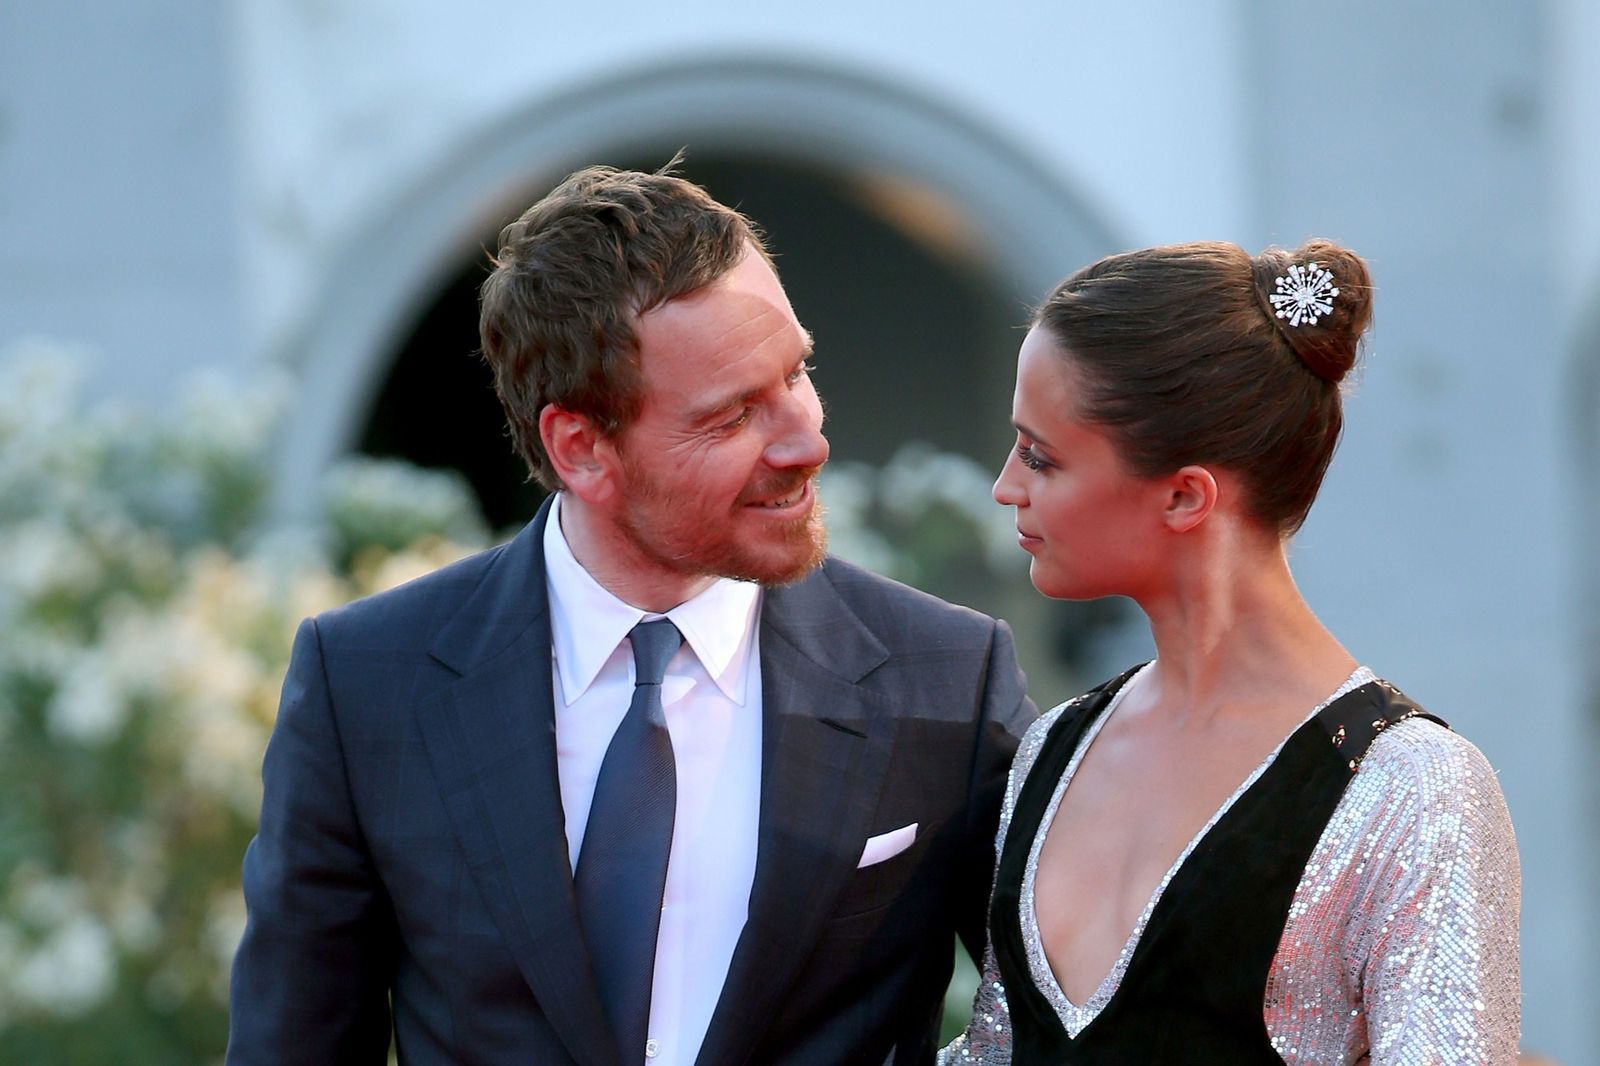 Alicia Vikander And Michael Fassbender To Enter Into Wedlock Next Month In Ibiza